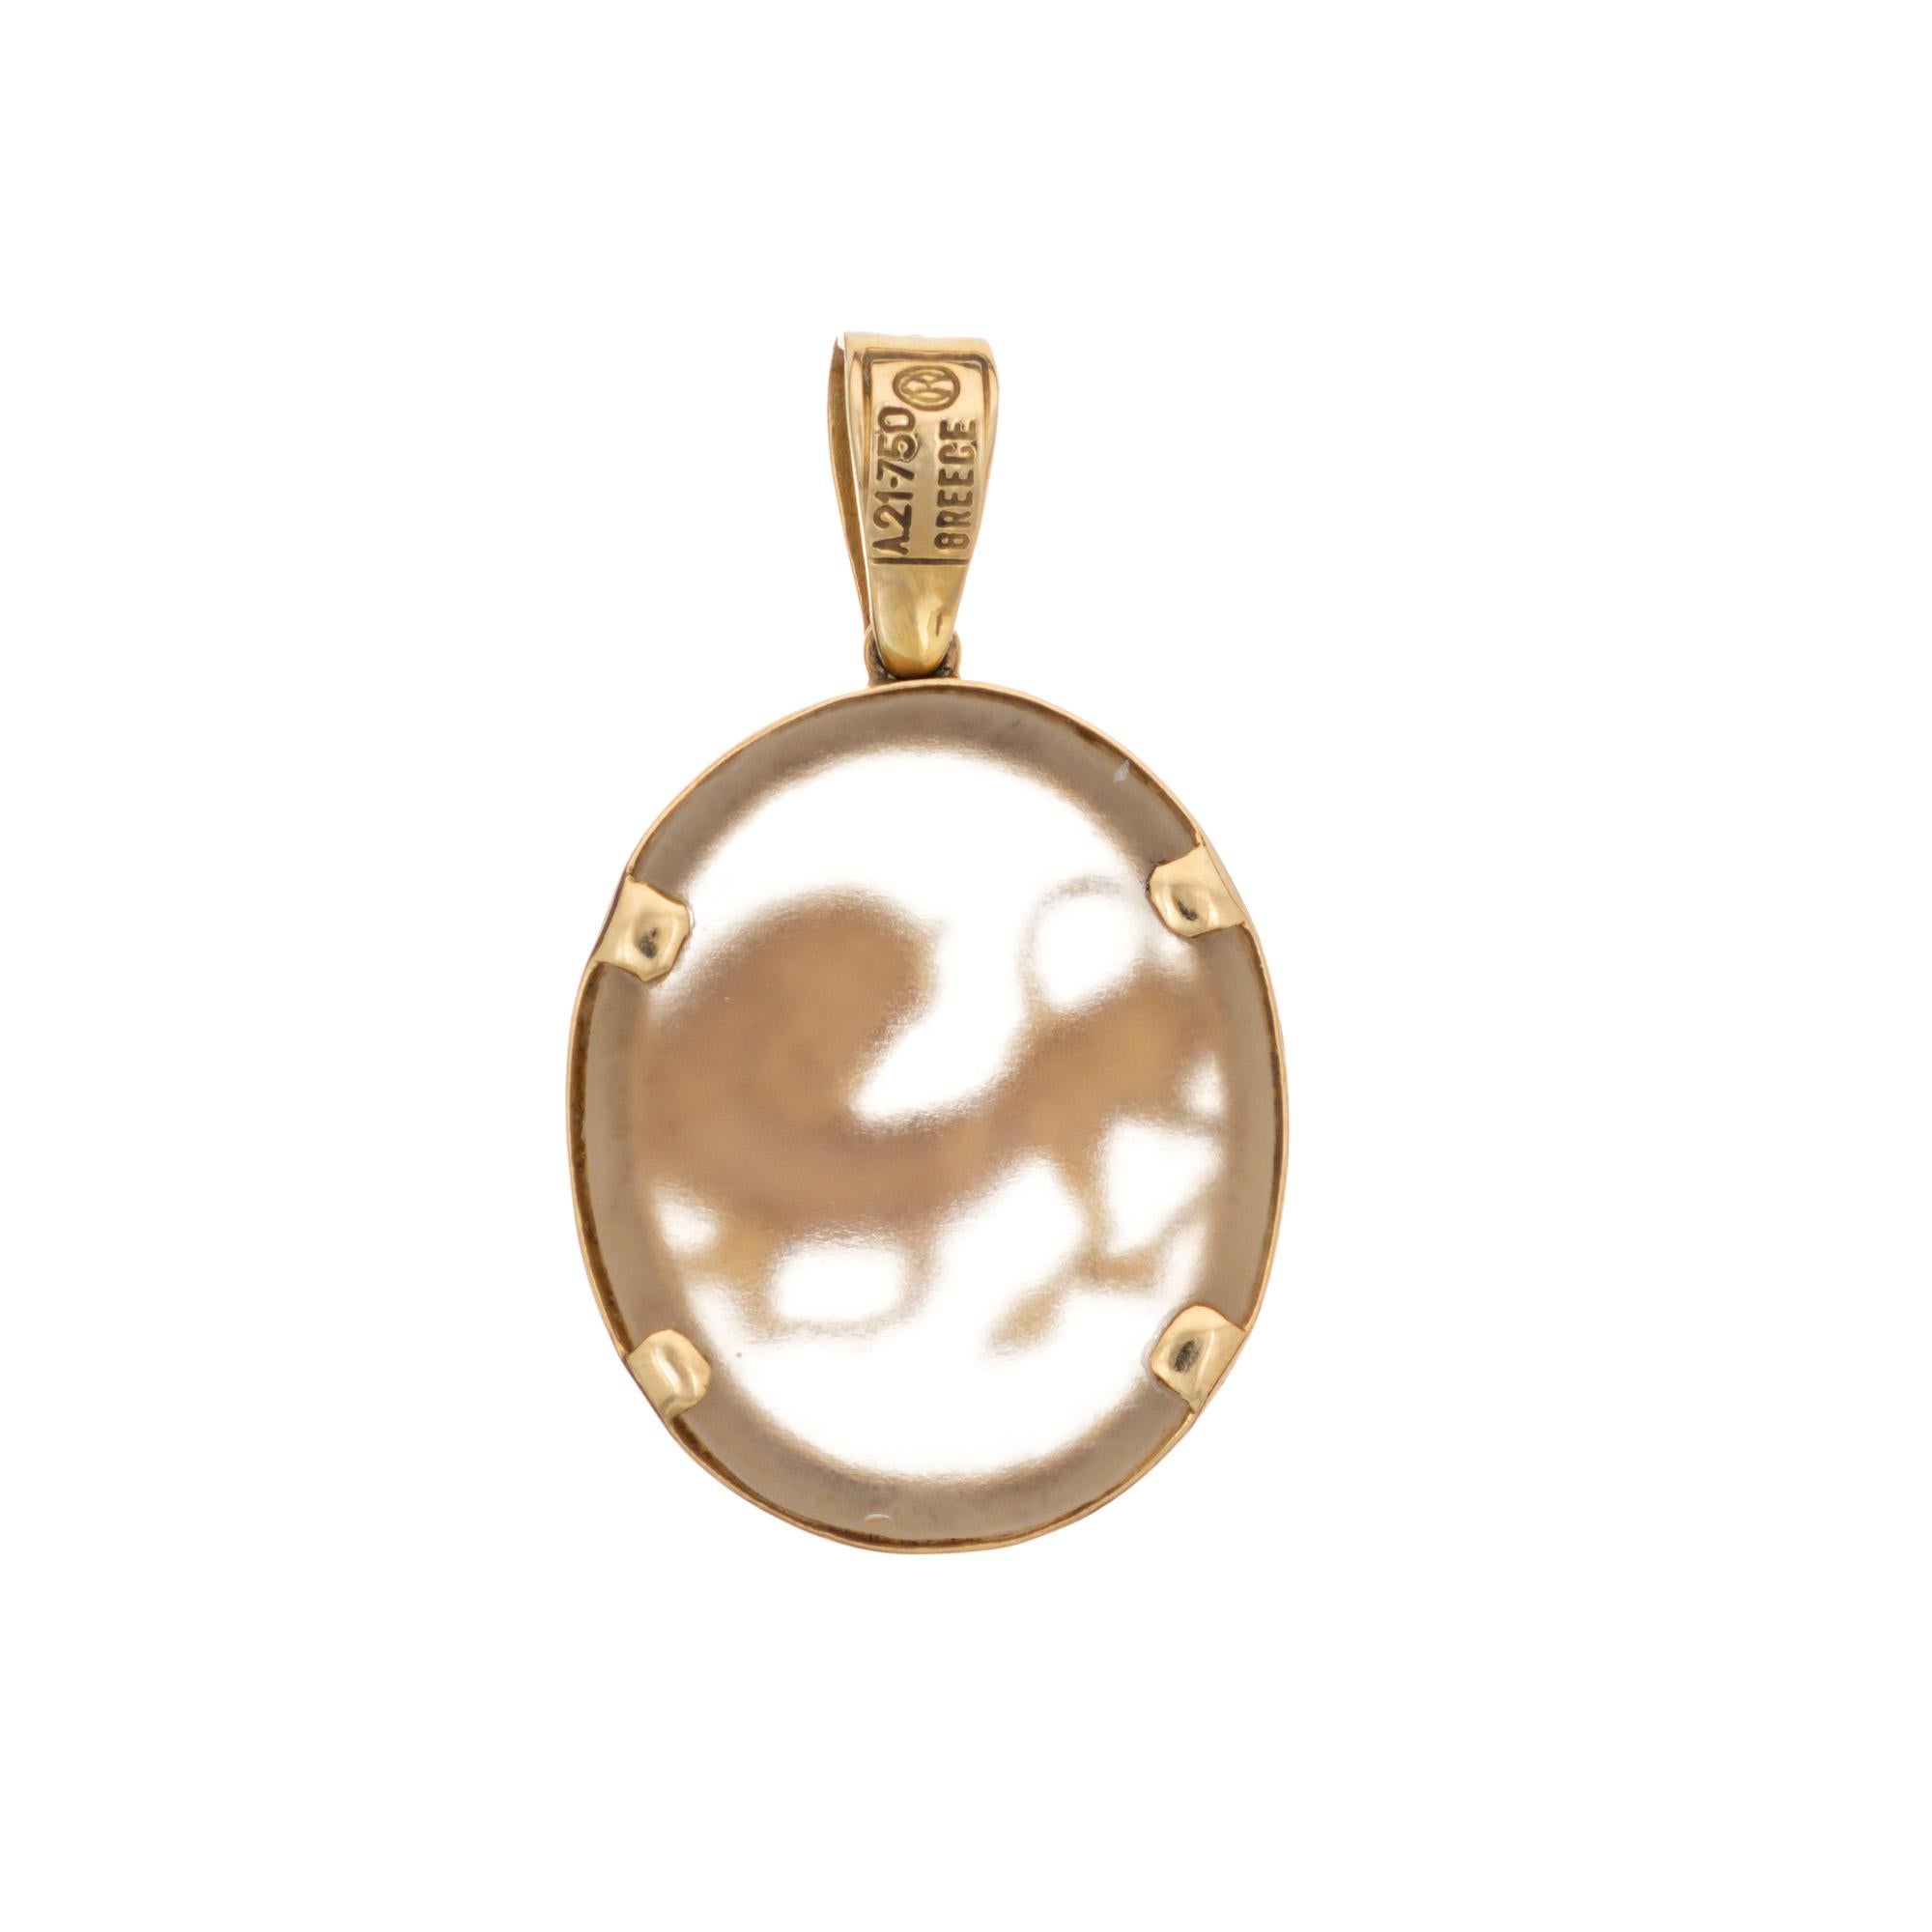 Ilias Lalaounis Pendant Frosted Rock Crystal. From the Sheild of Achilles collection, the medallion is based on Mycenaean stones. Lalaounis is a famed Greek jewelry company known for themes including science, nature, mosaics, astronomy and medicine.